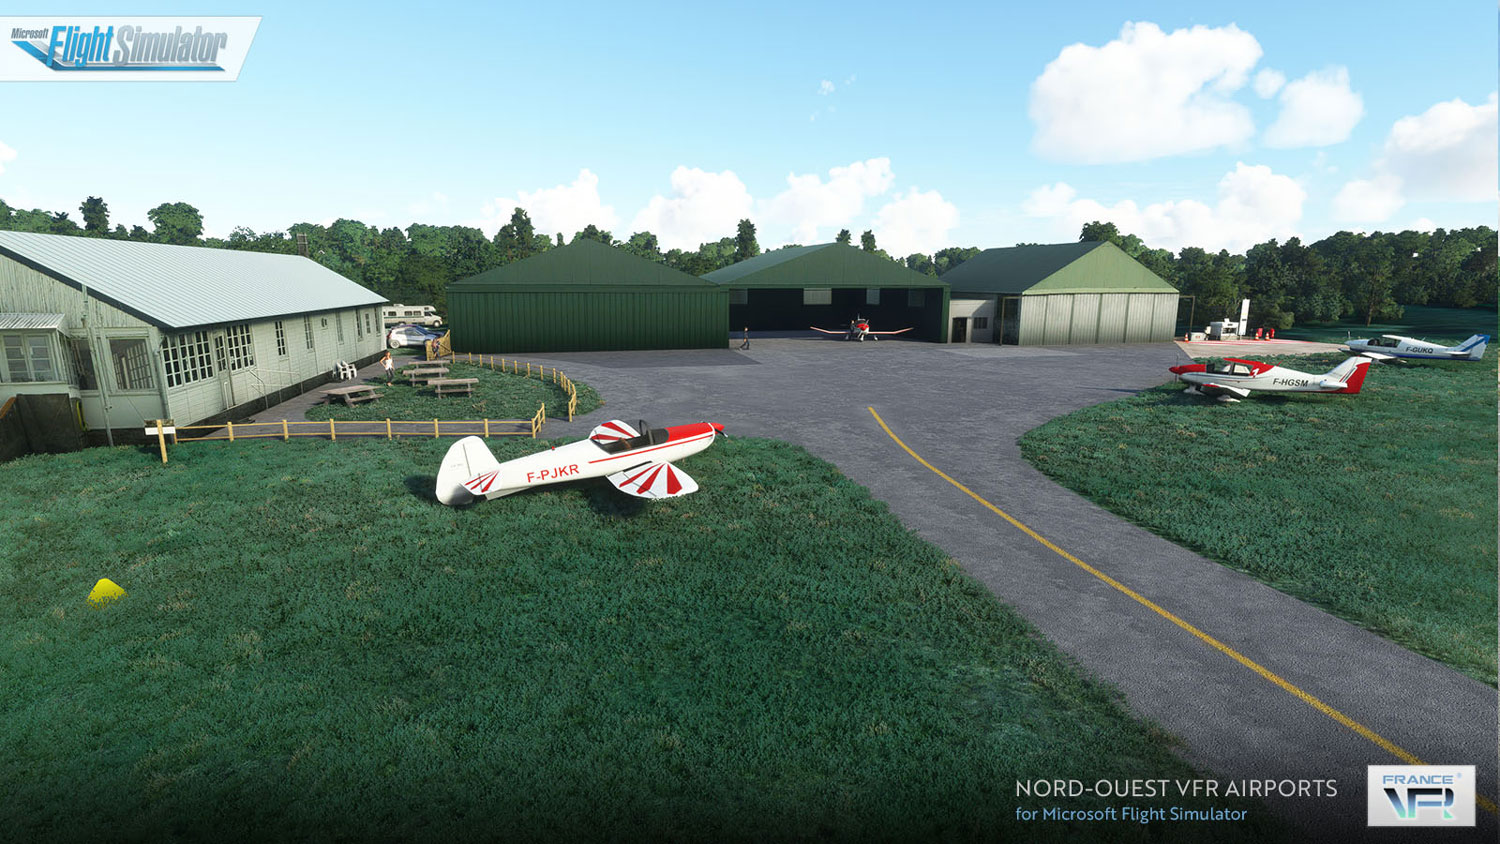 France VFR - North-West VFR Airports MSFS